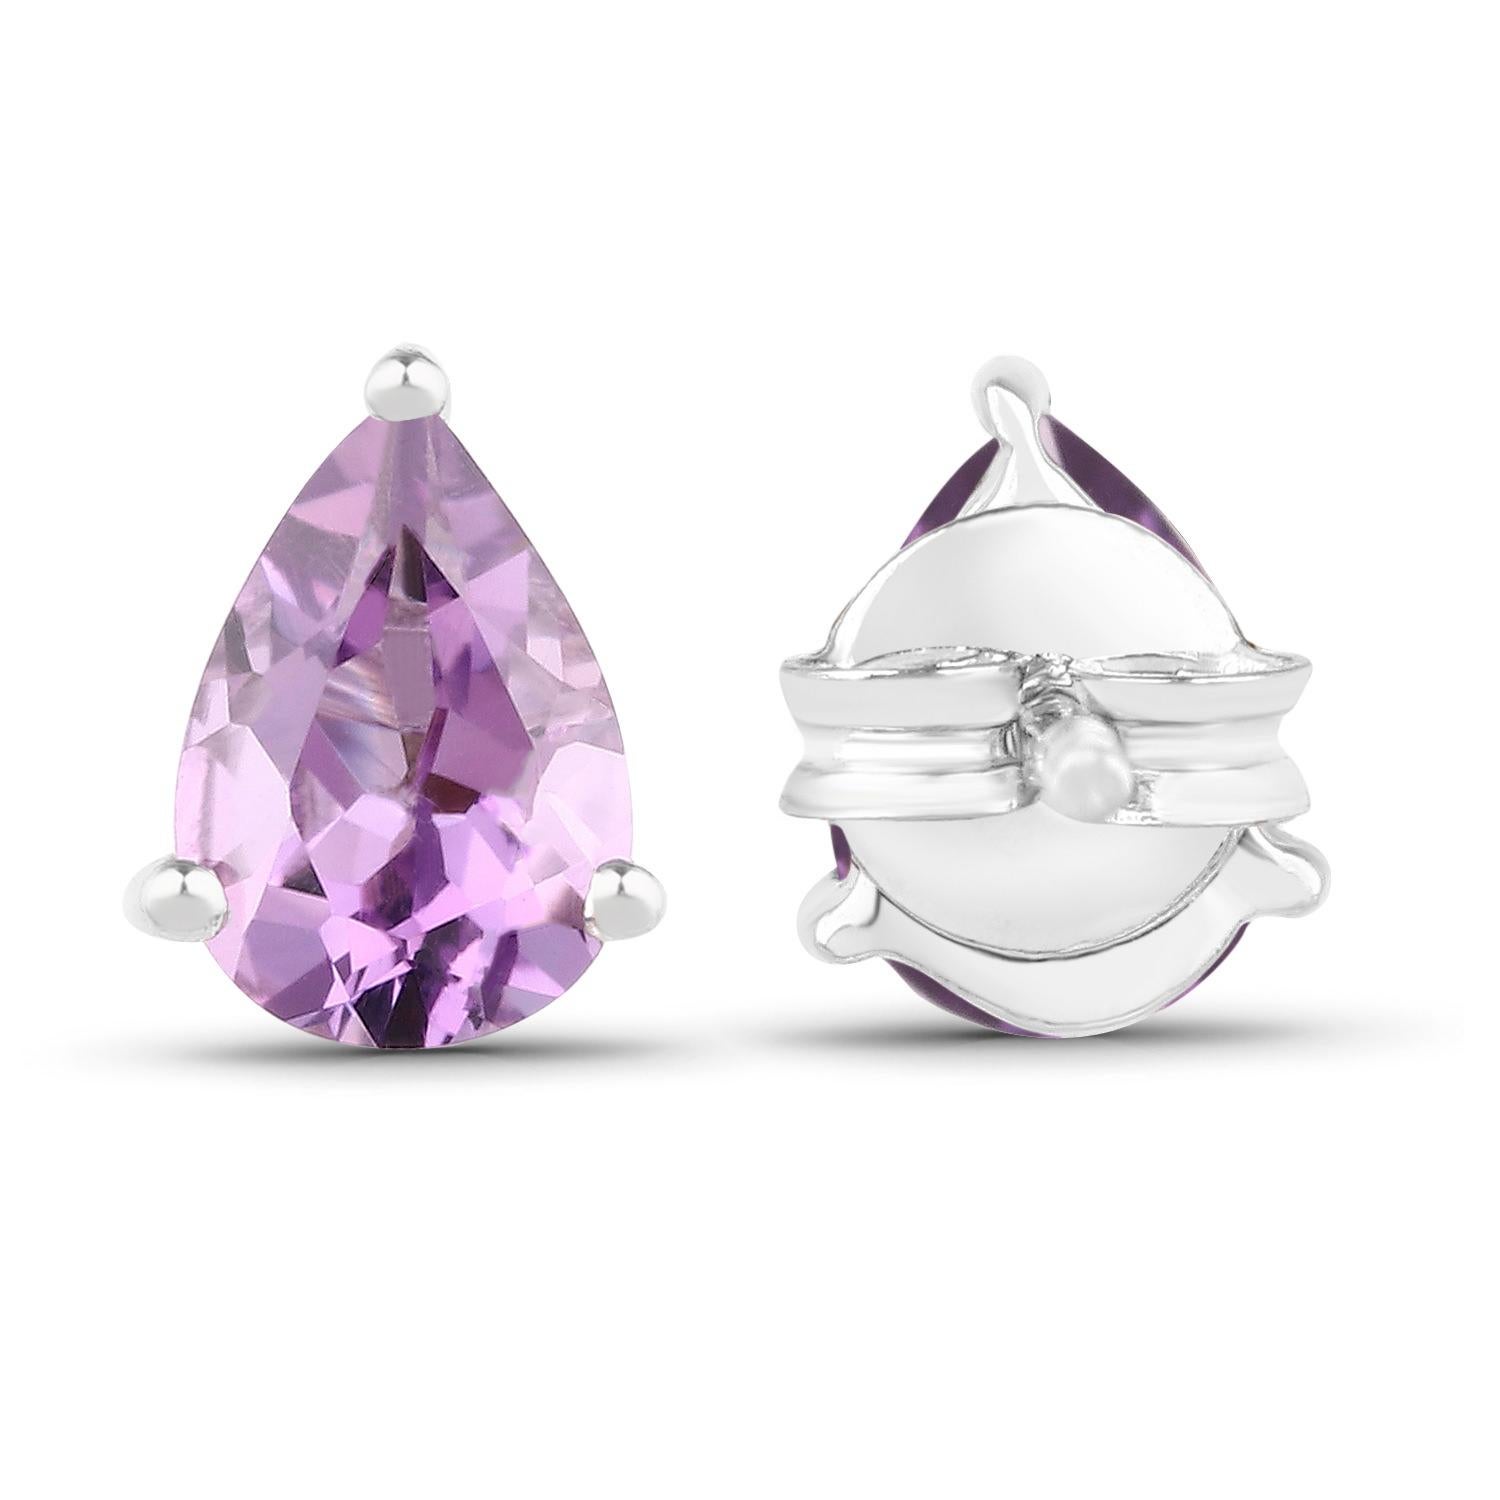 Women's or Men's Pear Cut Amethyst Stud Earrings 1.25 Carats Rhodium Plated Sterling Silver For Sale